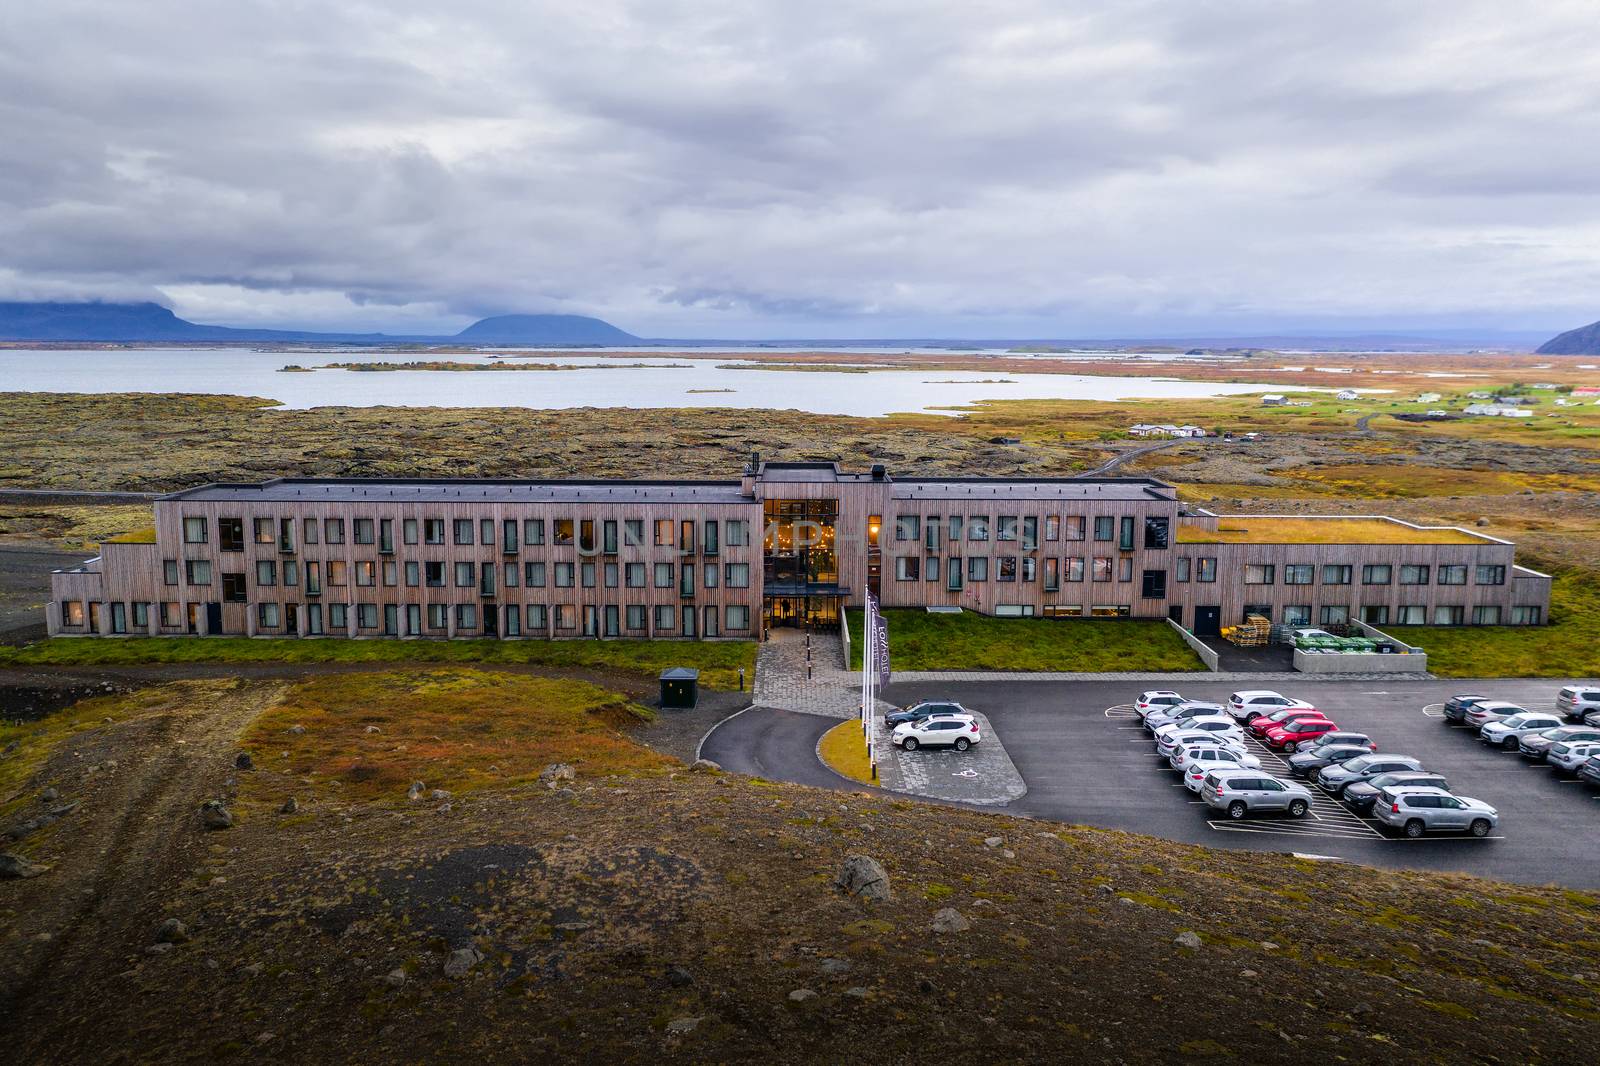 Fosshotel Myvatn located on the Ring Road near a beautiful lake in Iceland by nickfox